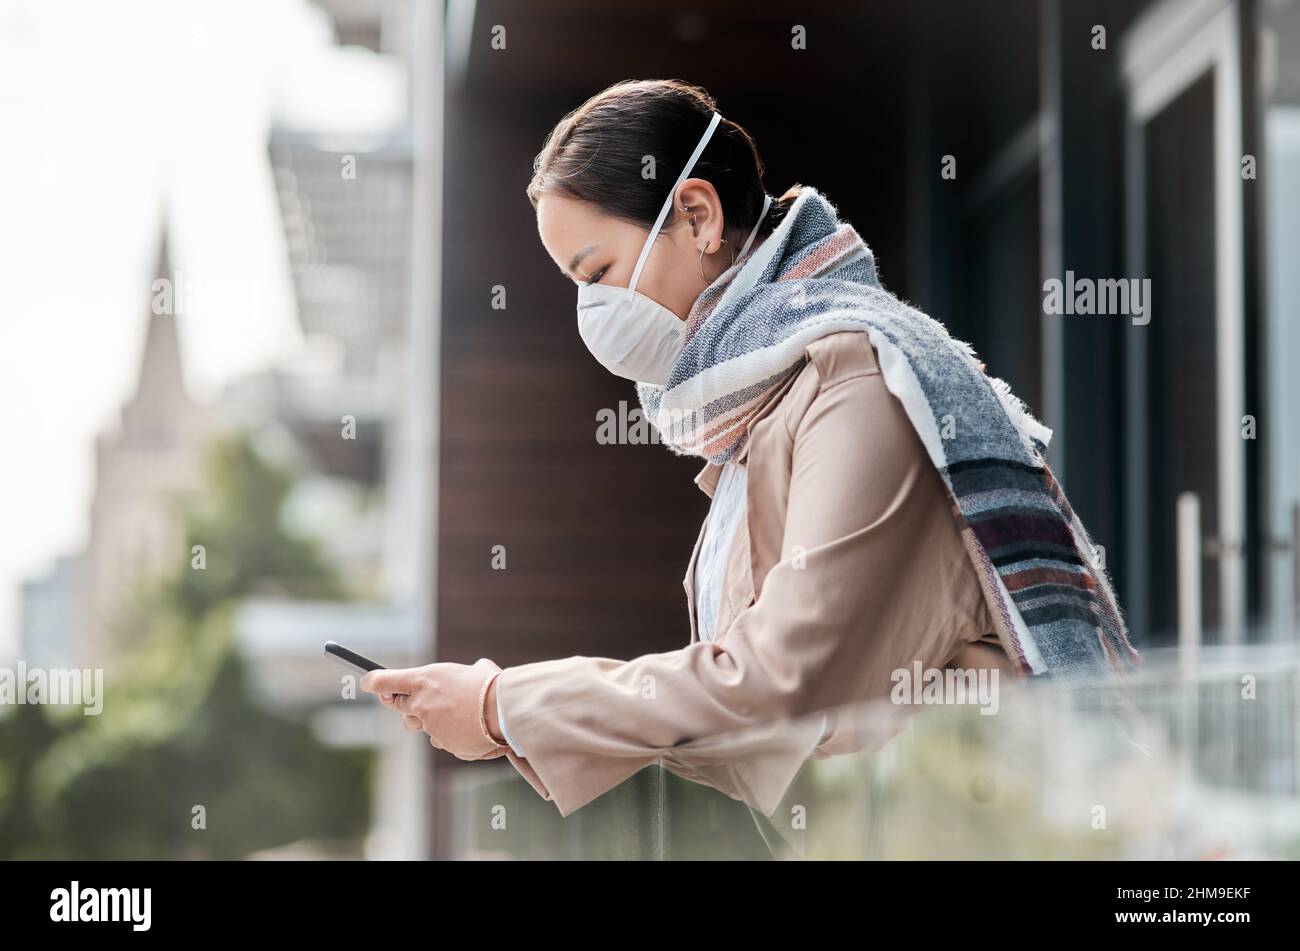 Technology allows us to be social while practising social distancing. Shot of a young woman wearing a mask and using a smartphone on the balcony at Stock Photo